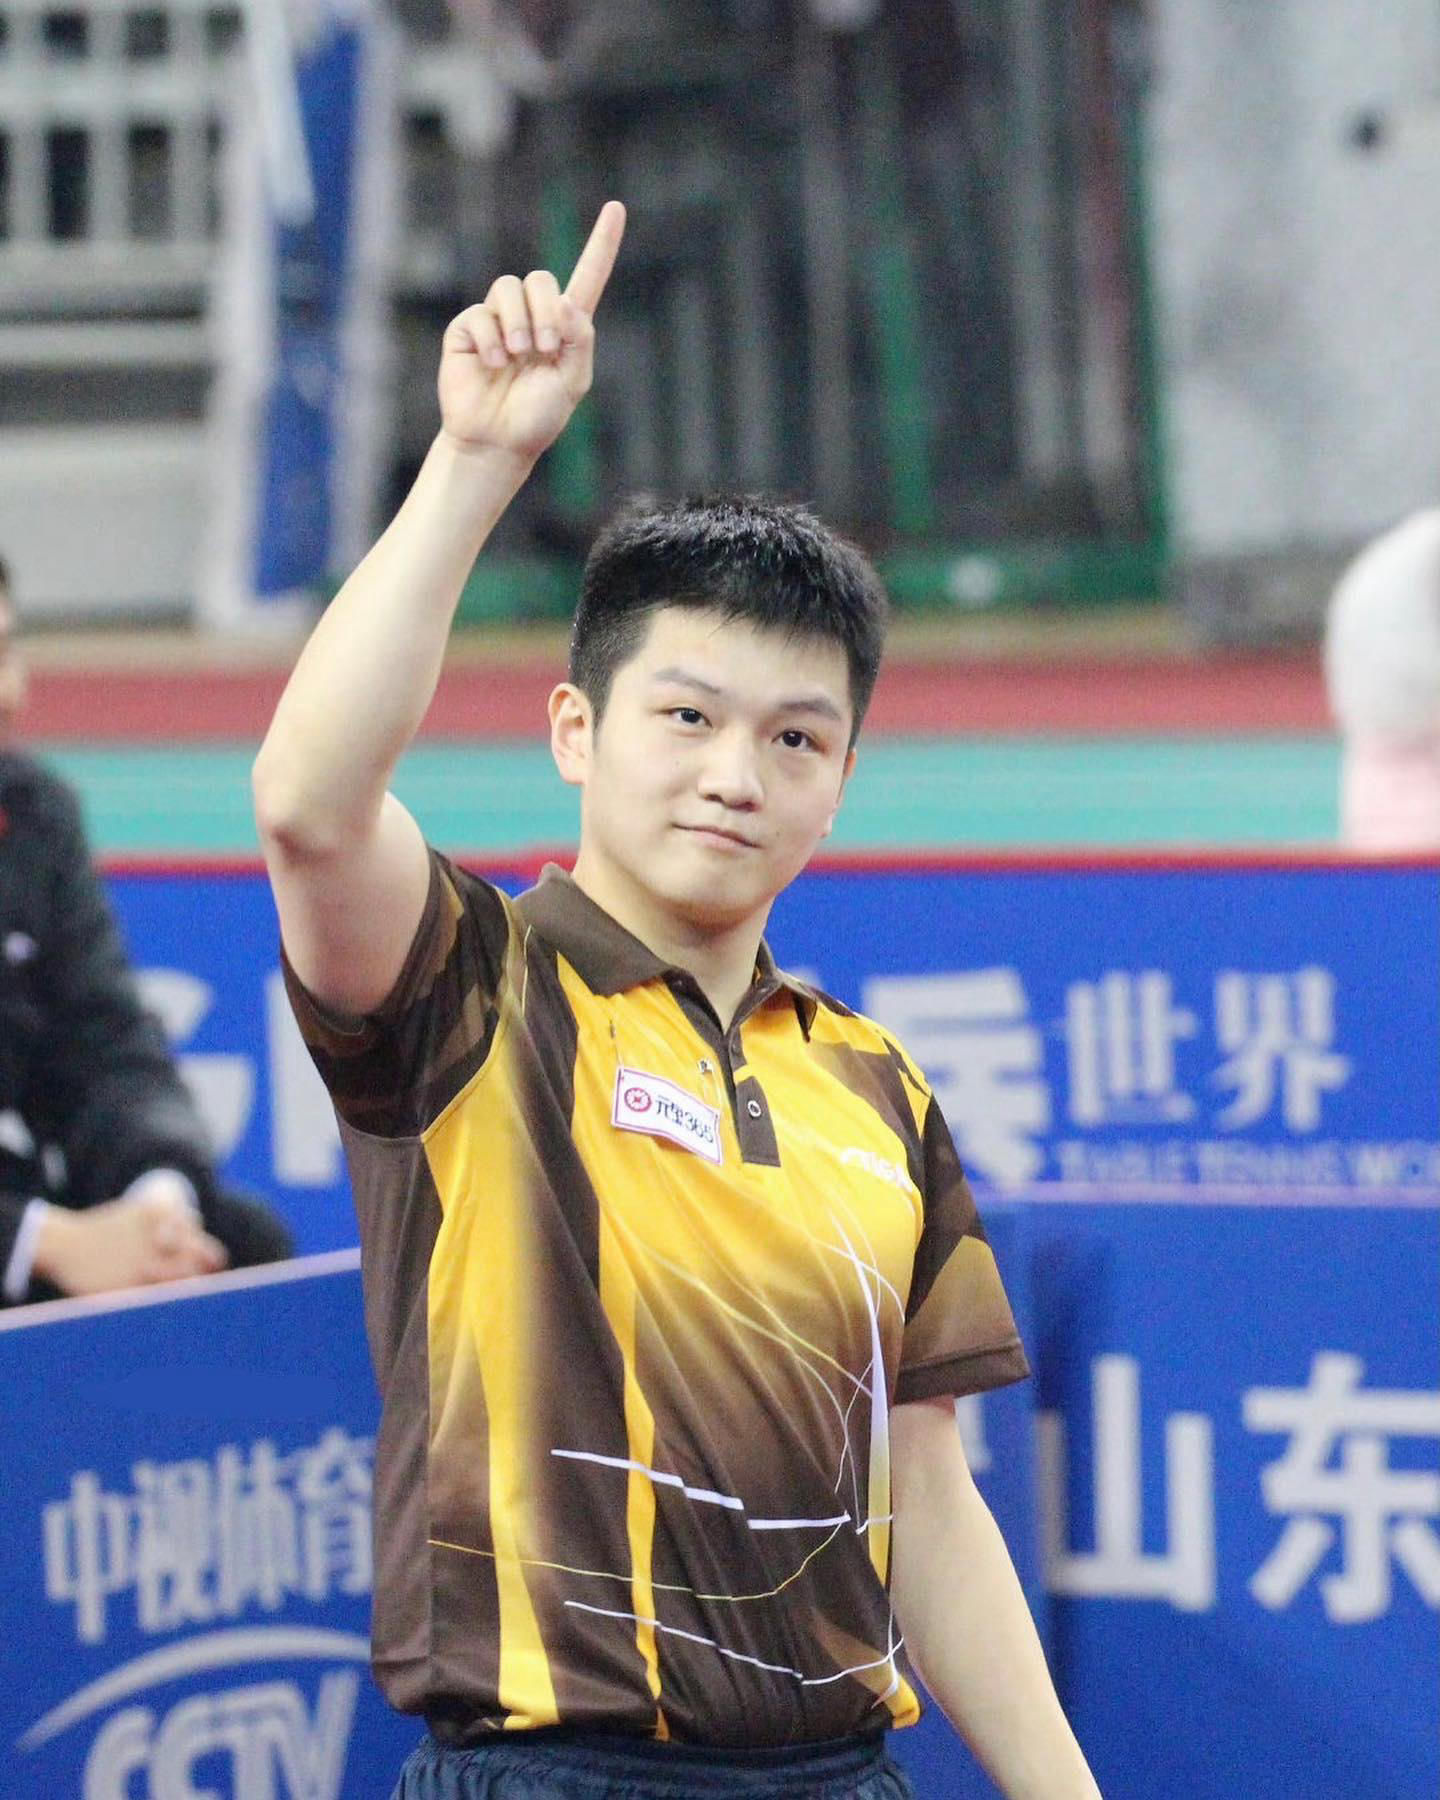 image  1 FanZhendong 樊振東 小胖 东哥 - Post of the day : 19/8/2022